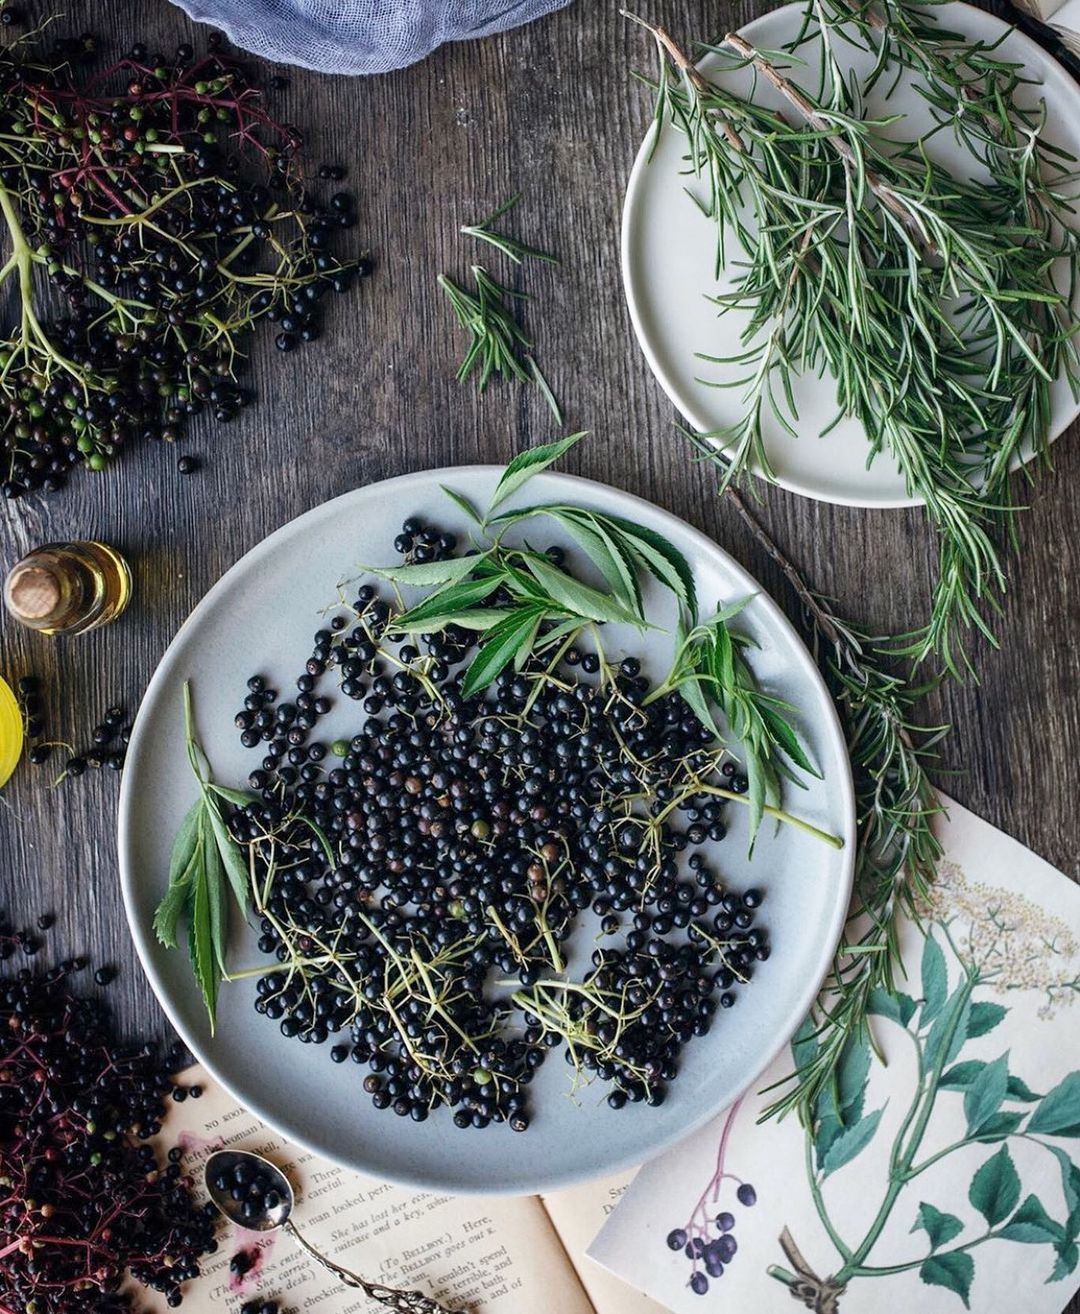 Worried About Keeping Well, Keep Calm, and Make Some Elderberry Syrup